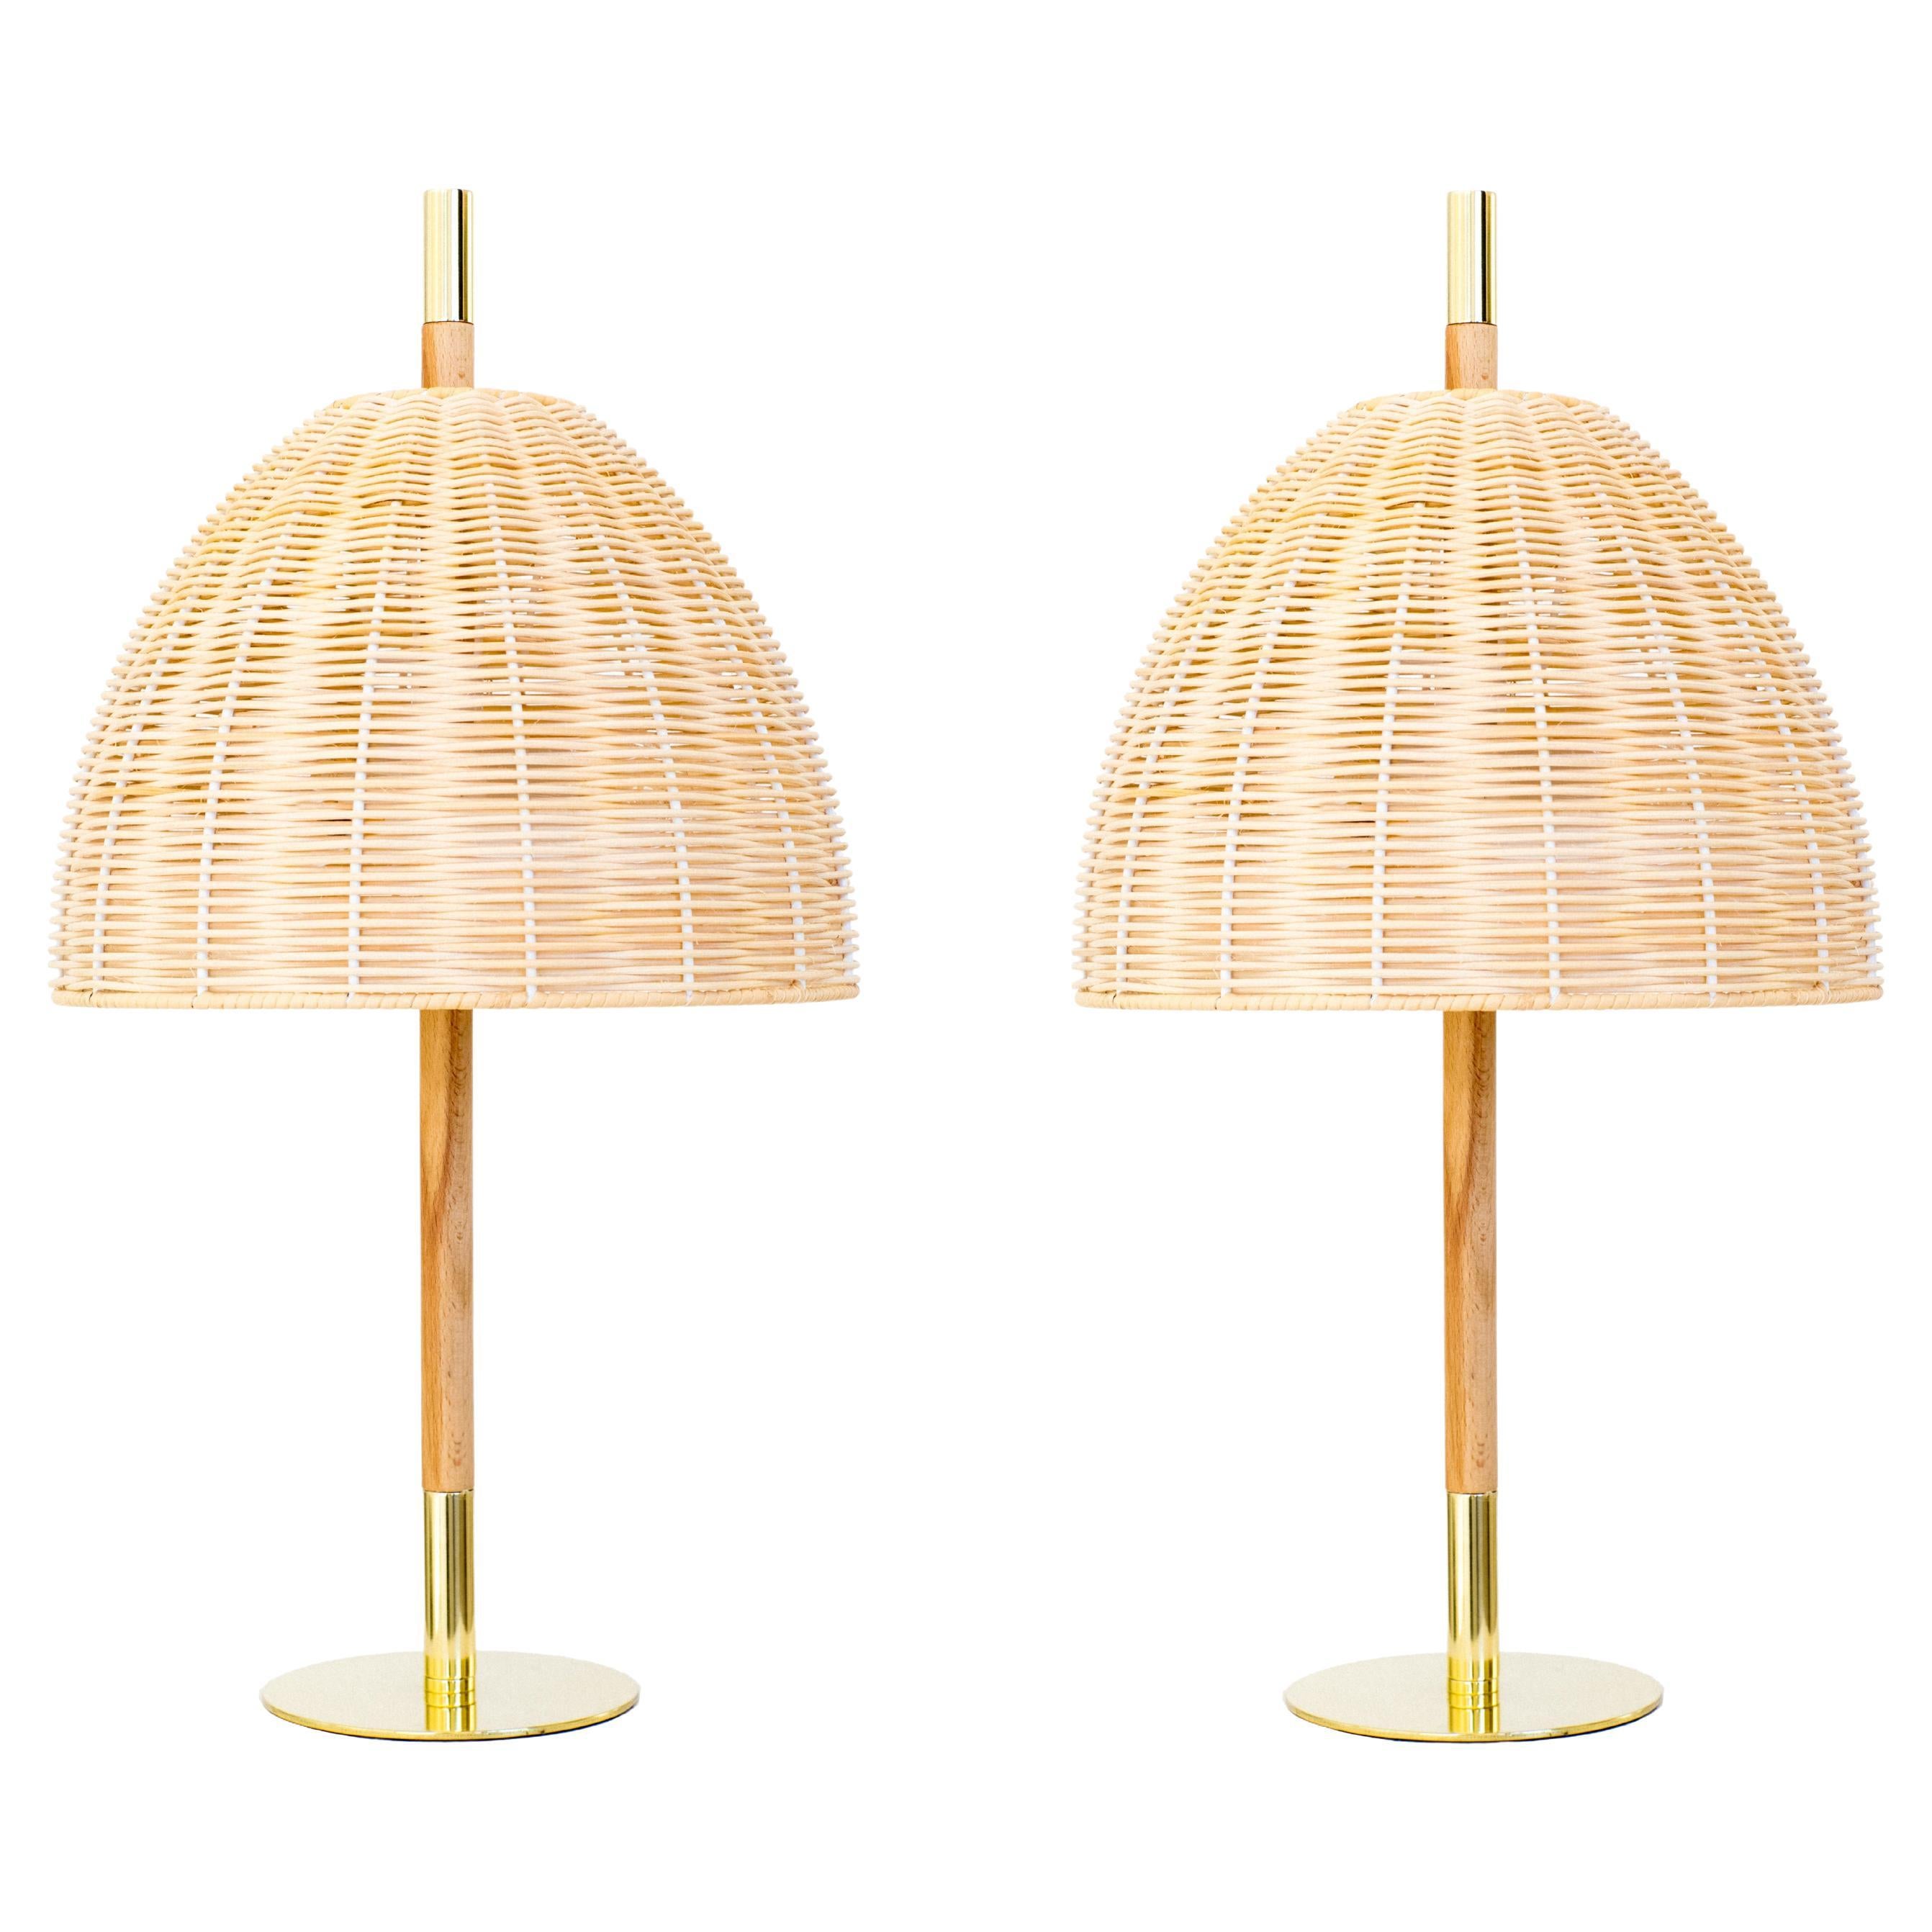 Pair of, Handmade Table Lamp, Natural Rattan Brass, Mediterranean Objects For Sale